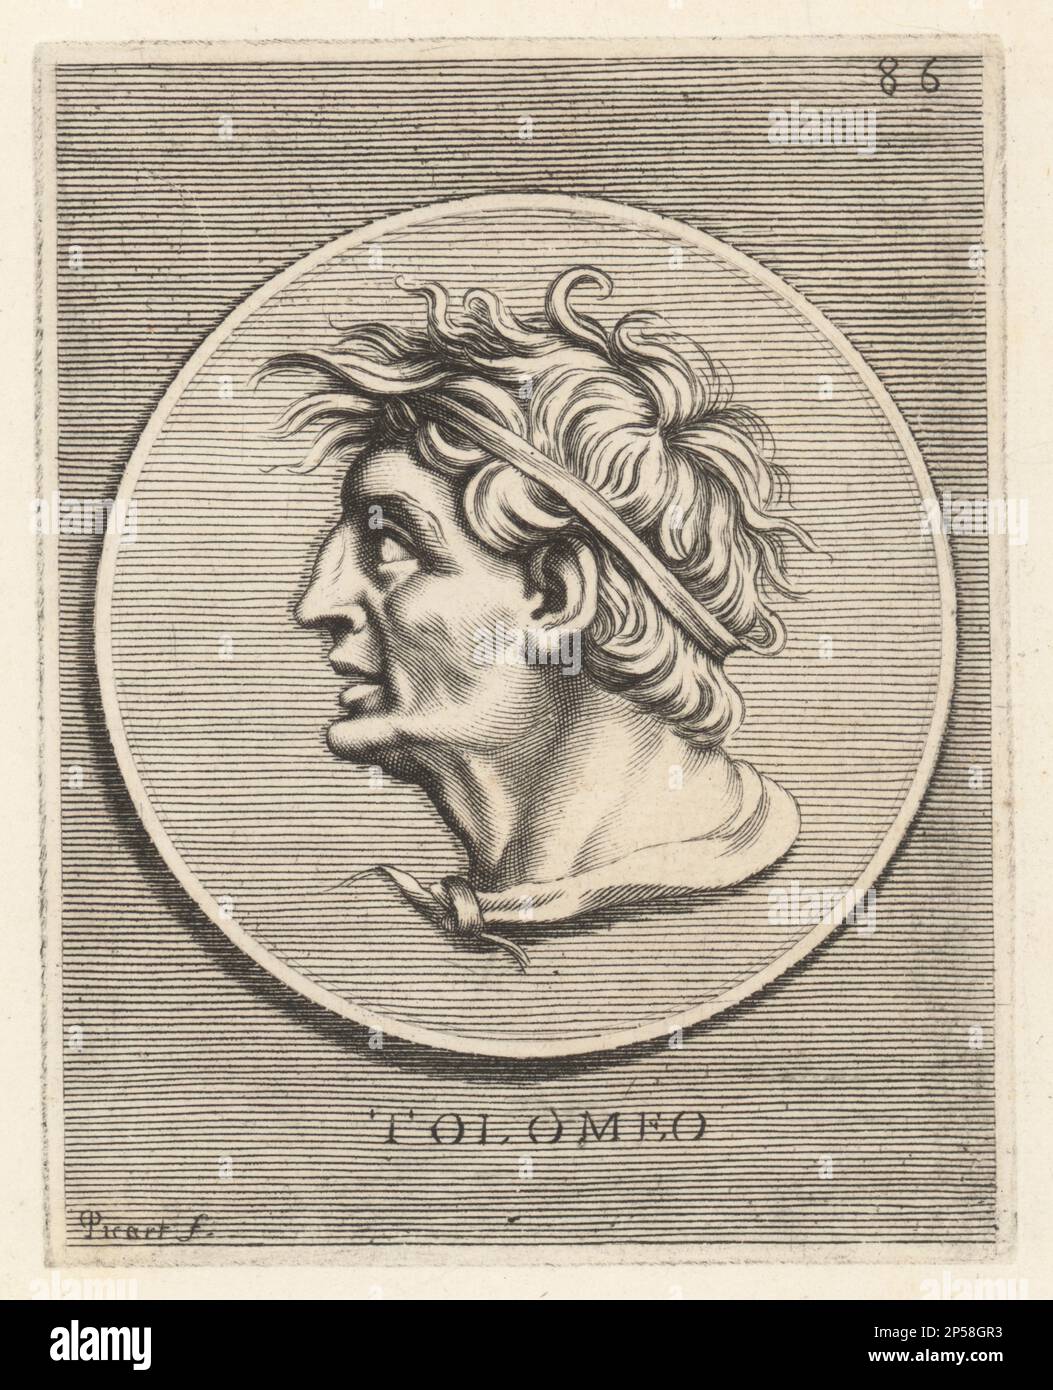 Ptolemy I Soter, c. 367-282 BC, Macedonian general under Alexander the Great who became ruler of Egypt and founder of the Ptolemaic dynasty. From a silver tetradrachm coin. Tolomeo. Copperplate engraving by Etienne Picart after Giovanni Angelo Canini from Iconografia, cioe disegni d'imagini de famosissimi monarchi, regi, filososi, poeti ed oratori dell' Antichita, Drawings of images of famous monarchs, kings, philosophers, poets and orators of Antiquity, Ignatio de’Lazari, Rome, 1699. Stock Photo